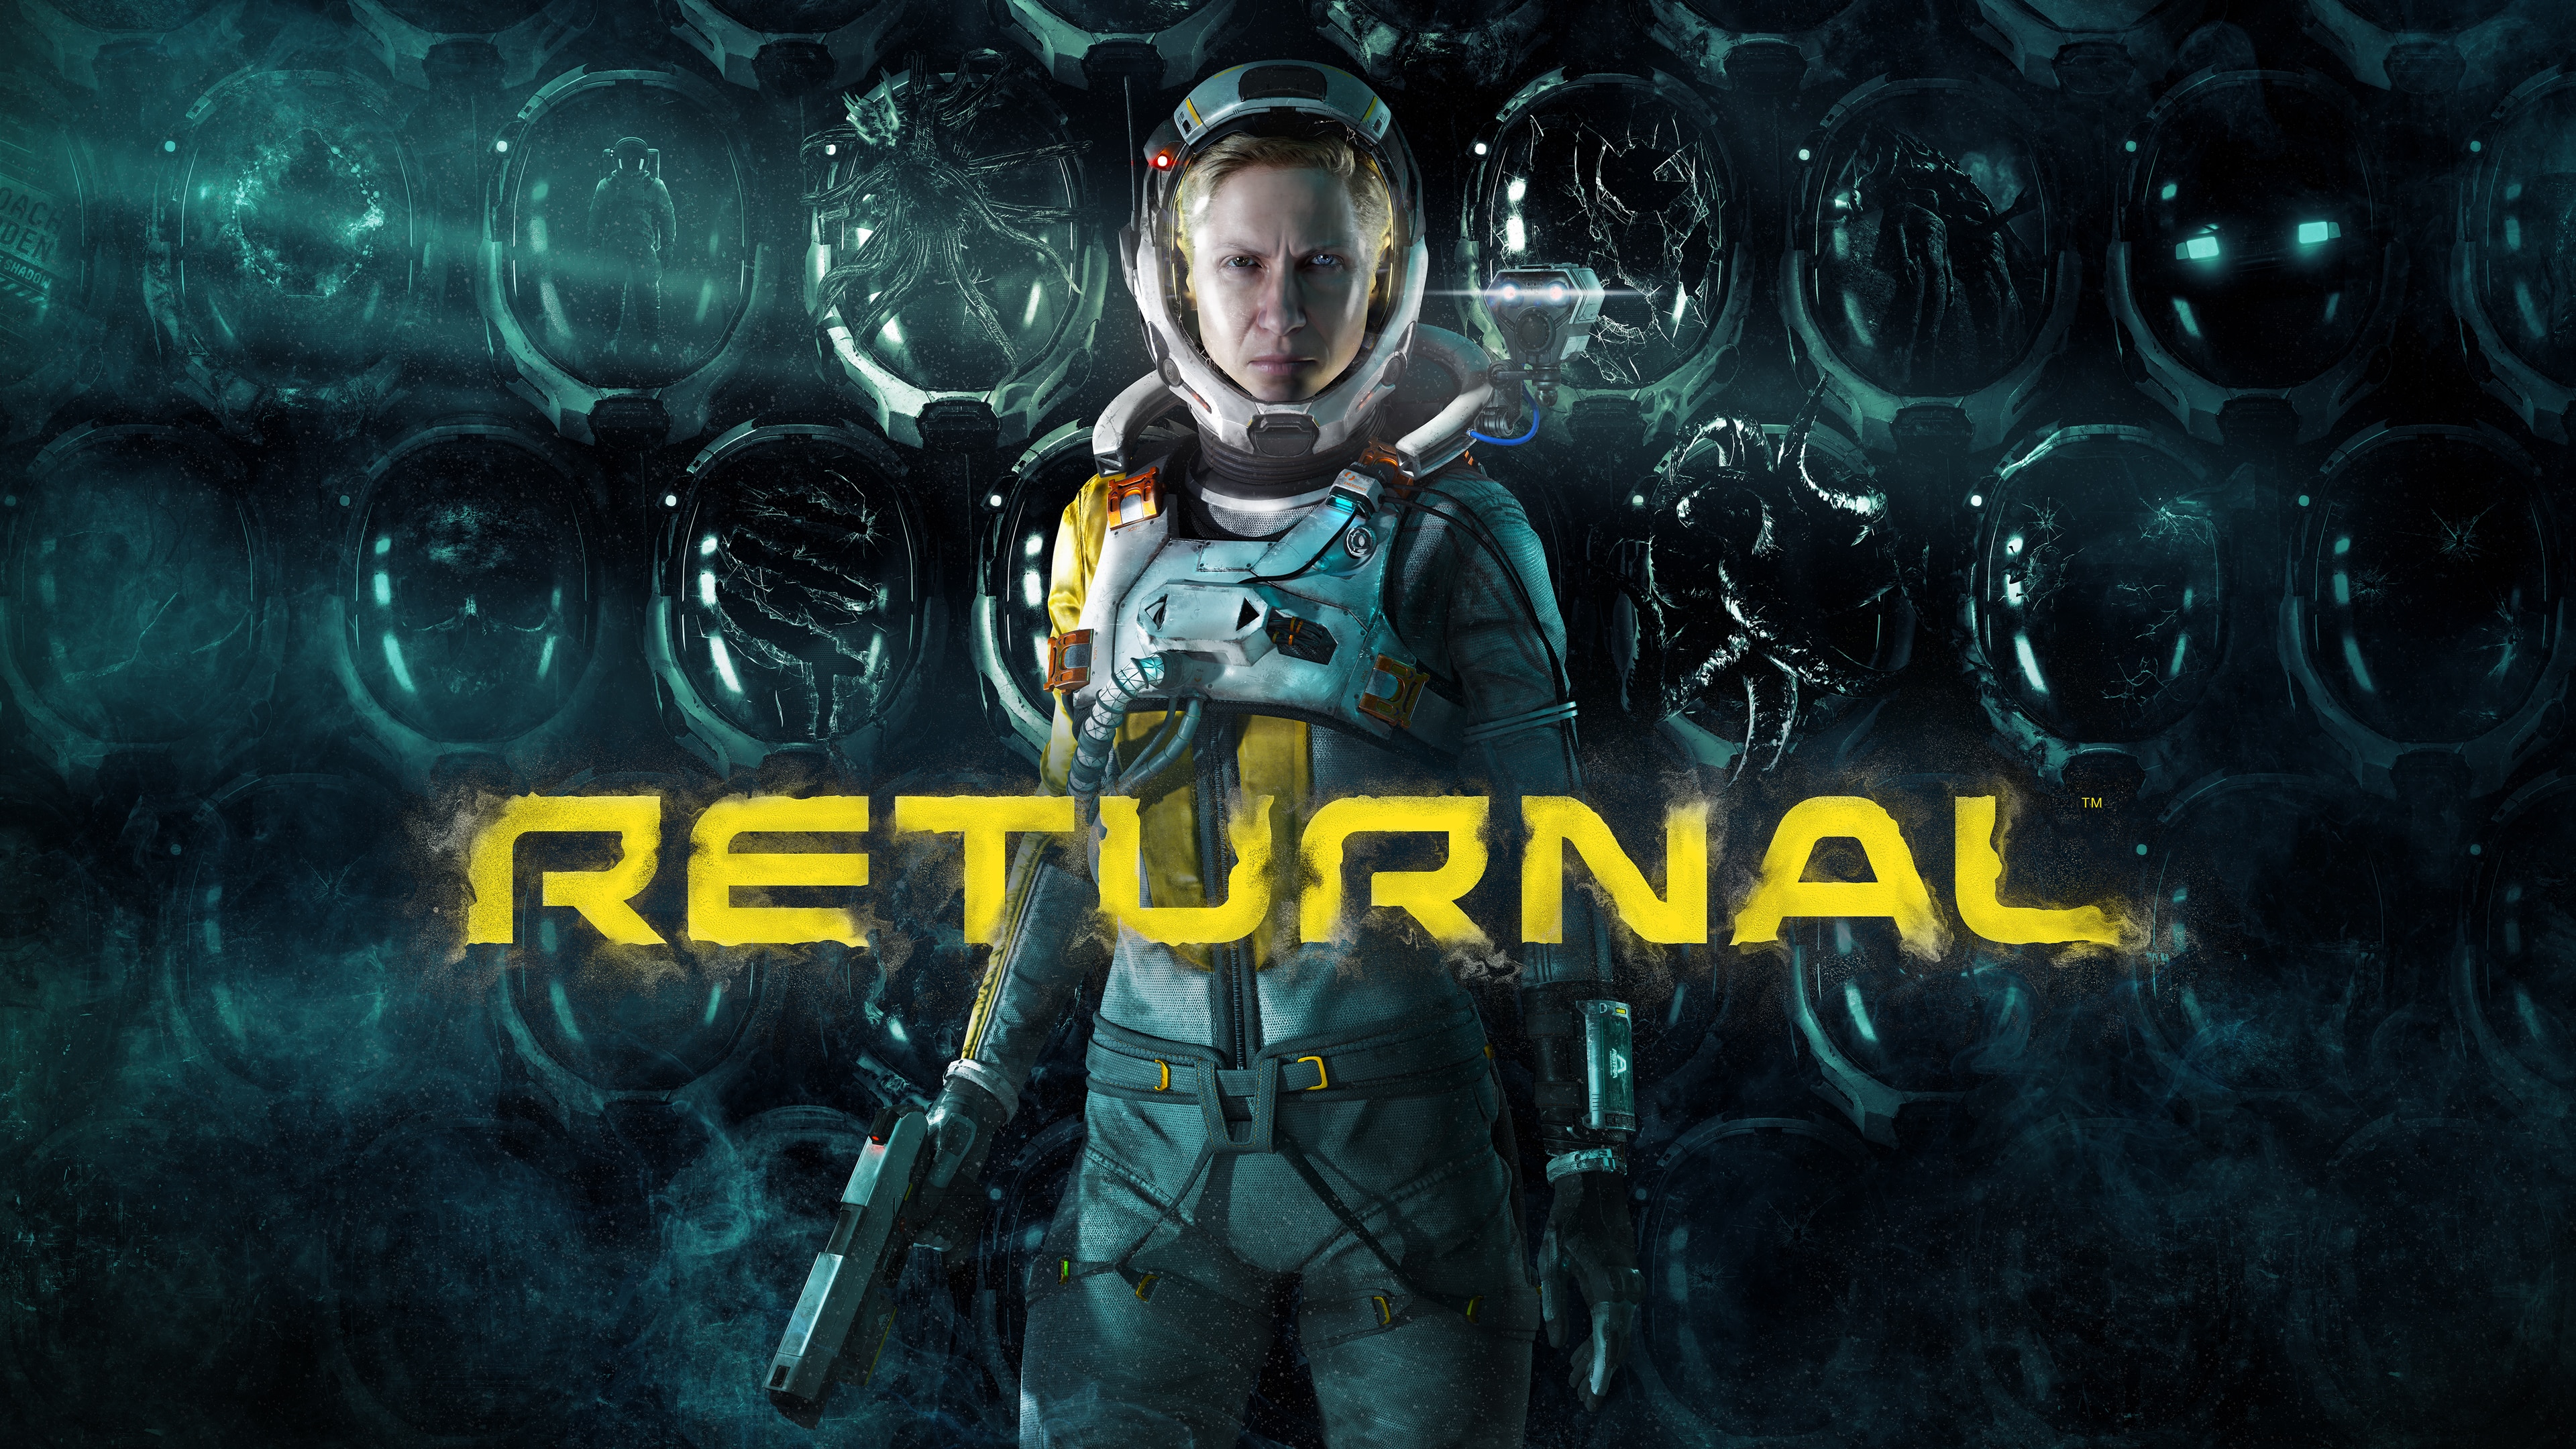 PS4 and PS5 Digital Games: Returnal $49.69 & Many More